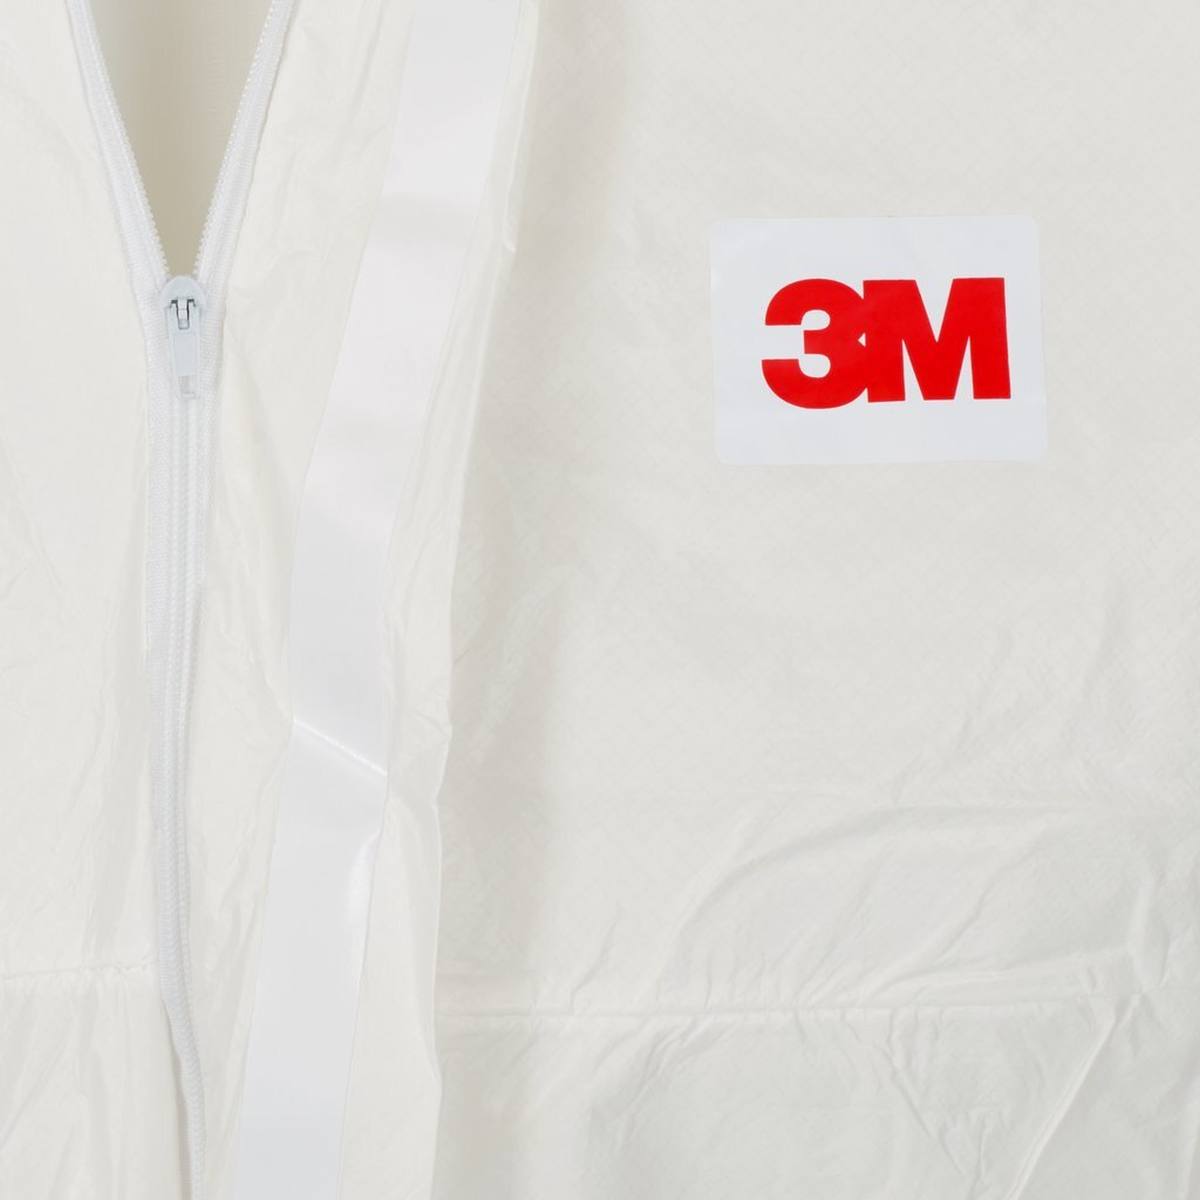 3M 4540+ coverall, white+blue, type 5/6, size M, robust, lint-free, reinforced seams, SMMMS material, breathable, detachable zipper, knitted cuffs